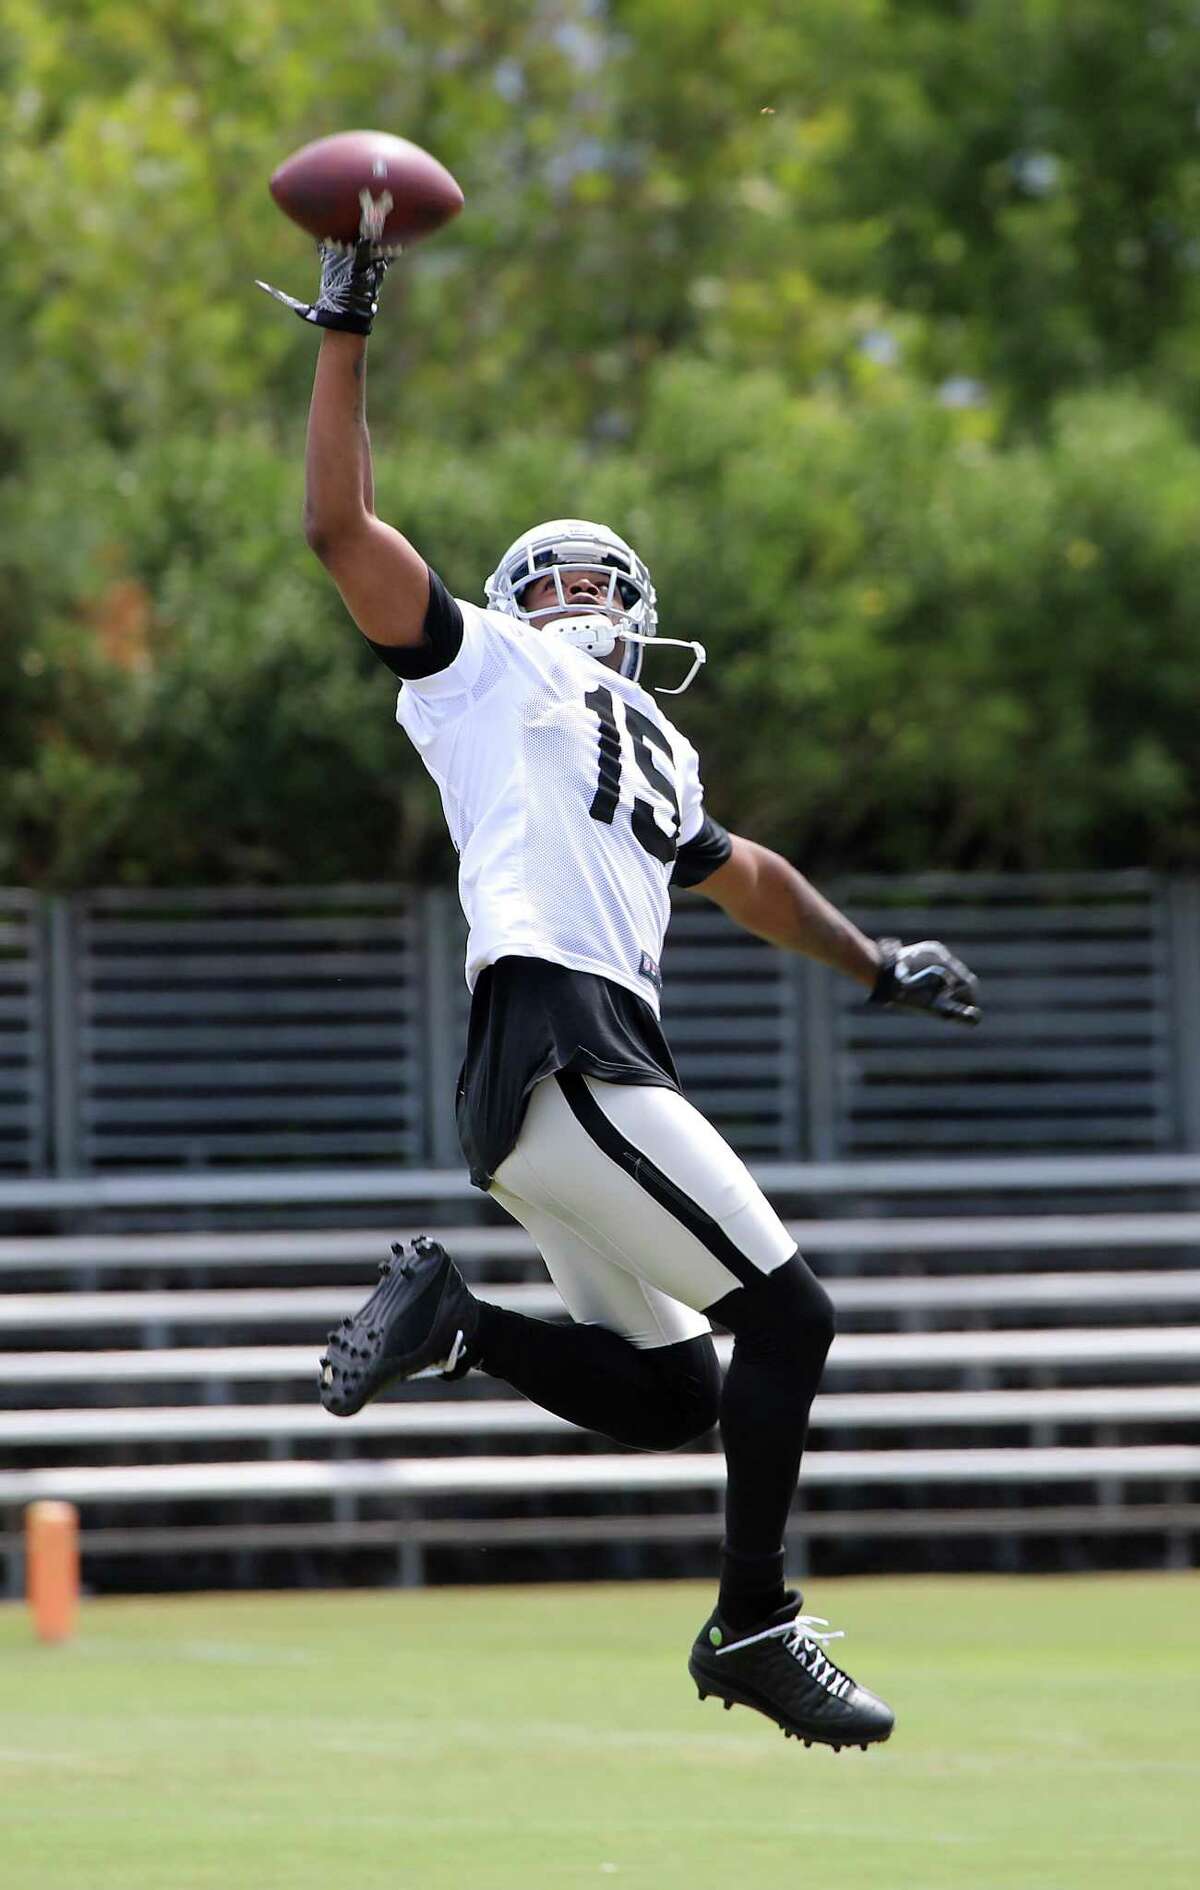 Michael Crabtree may not say it, but there are quite a few scouts and executives who will say that the Raiders’ receiver possesses some of the best hands in the NFL.